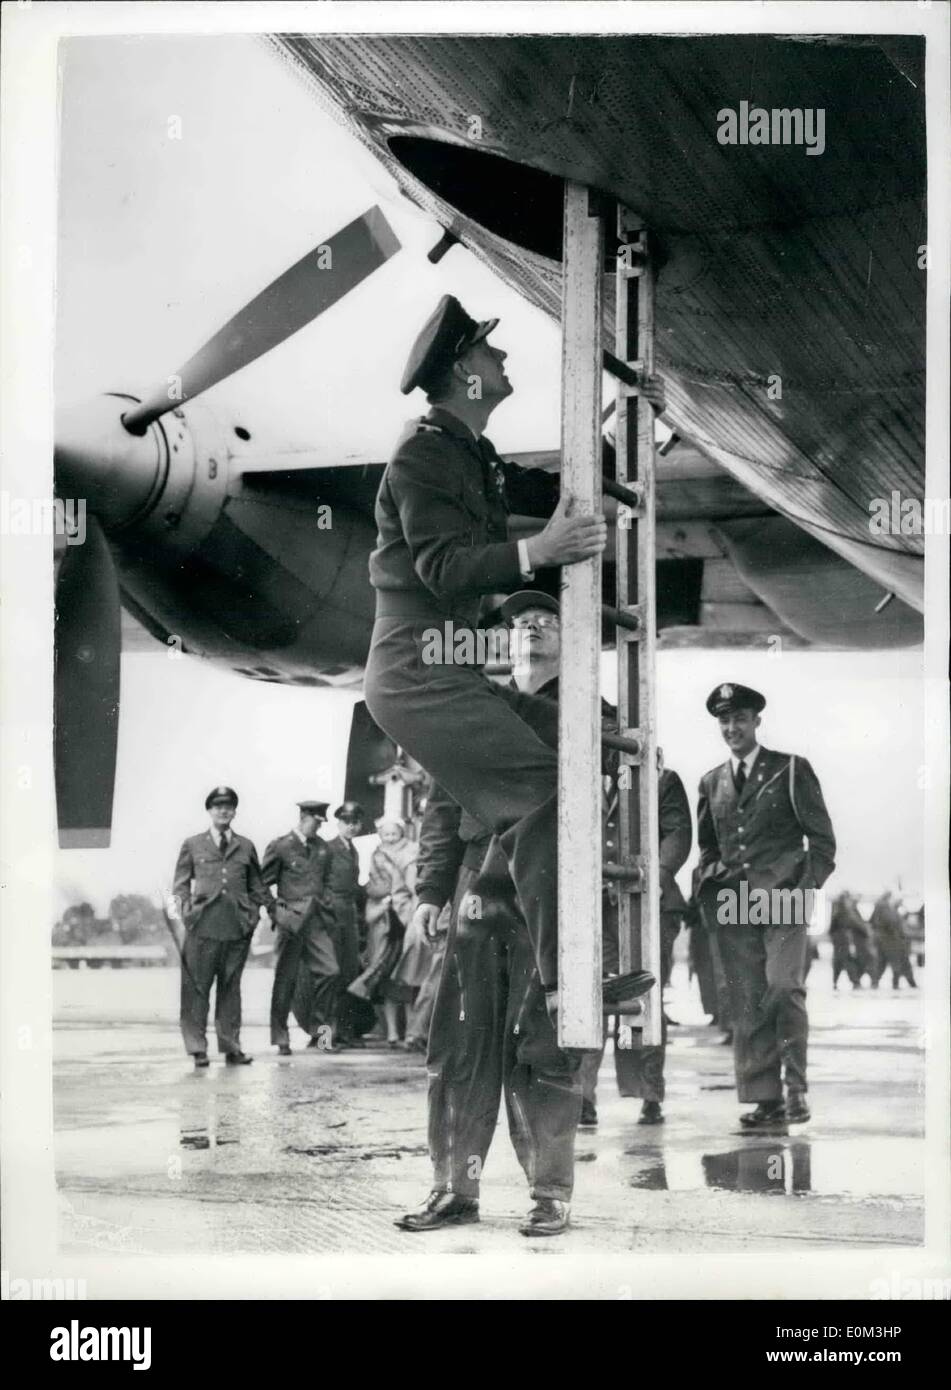 May 05, 1953 - Duke Inspects U.S. Atom Bomb Carrier: The Duke of Edinburgh climbs up int the giant RB. 36. the world's largest operational bomber, at Brize Norton, Oxfordshire, yesterday, Bases. The Duke, who flew 400 miles in a Viking aircraft of The Queen's Flight, also inspected American troops at Bentwaters, Sussex and Burtonwood, Lancashire. At Brize Norton, he inspected gun sites and crews. Stock Photo